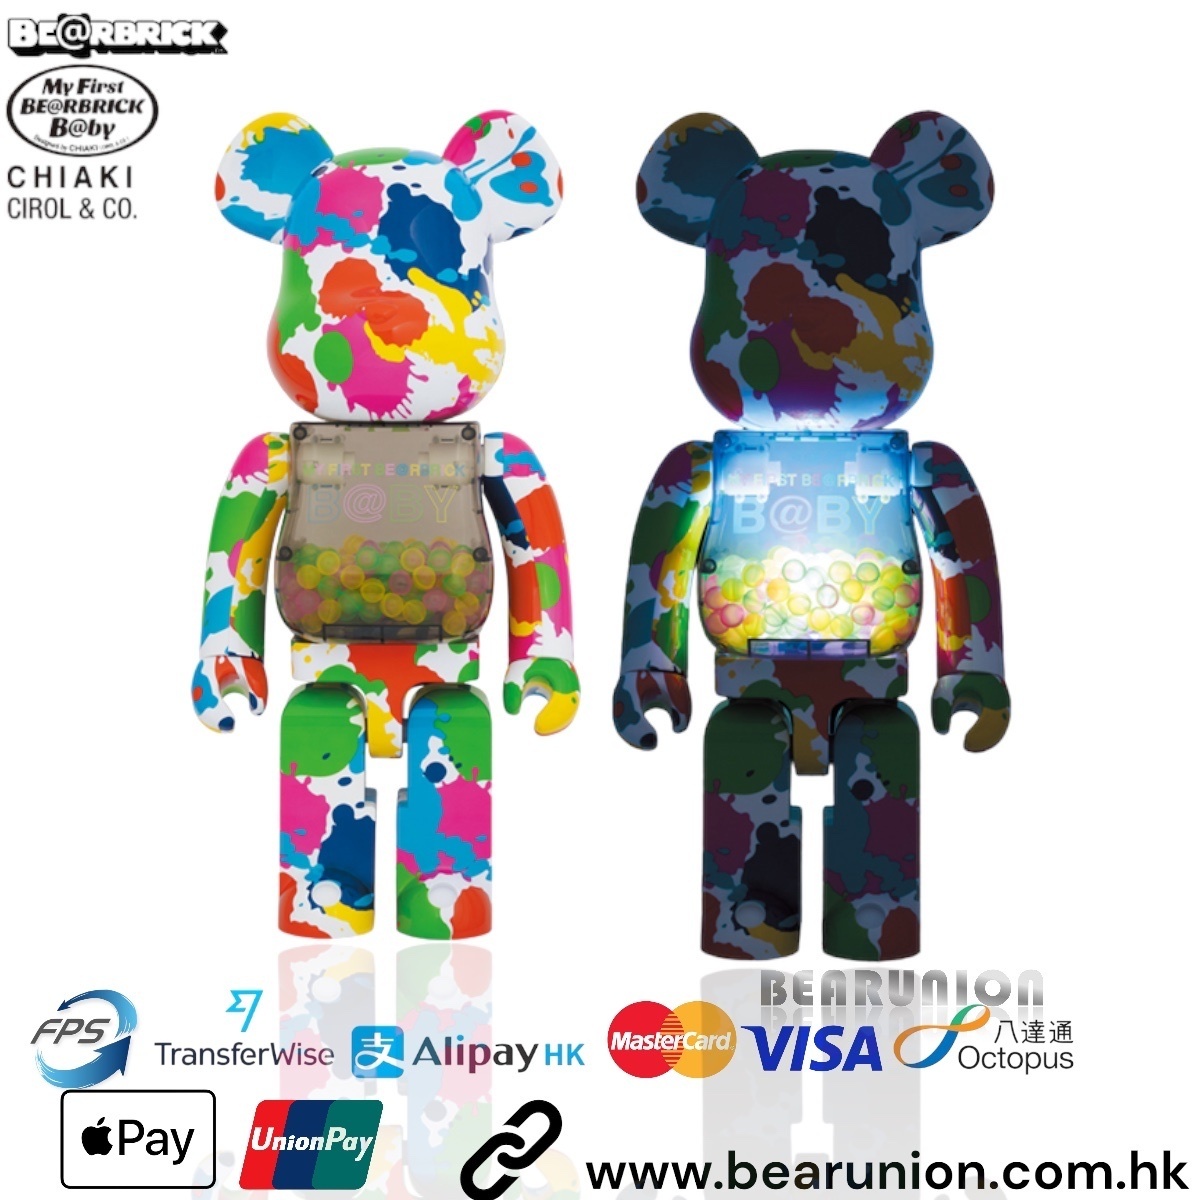 MY FIRST BE@RBRICK B@BY COLOR SPLASH Ver. 1000％